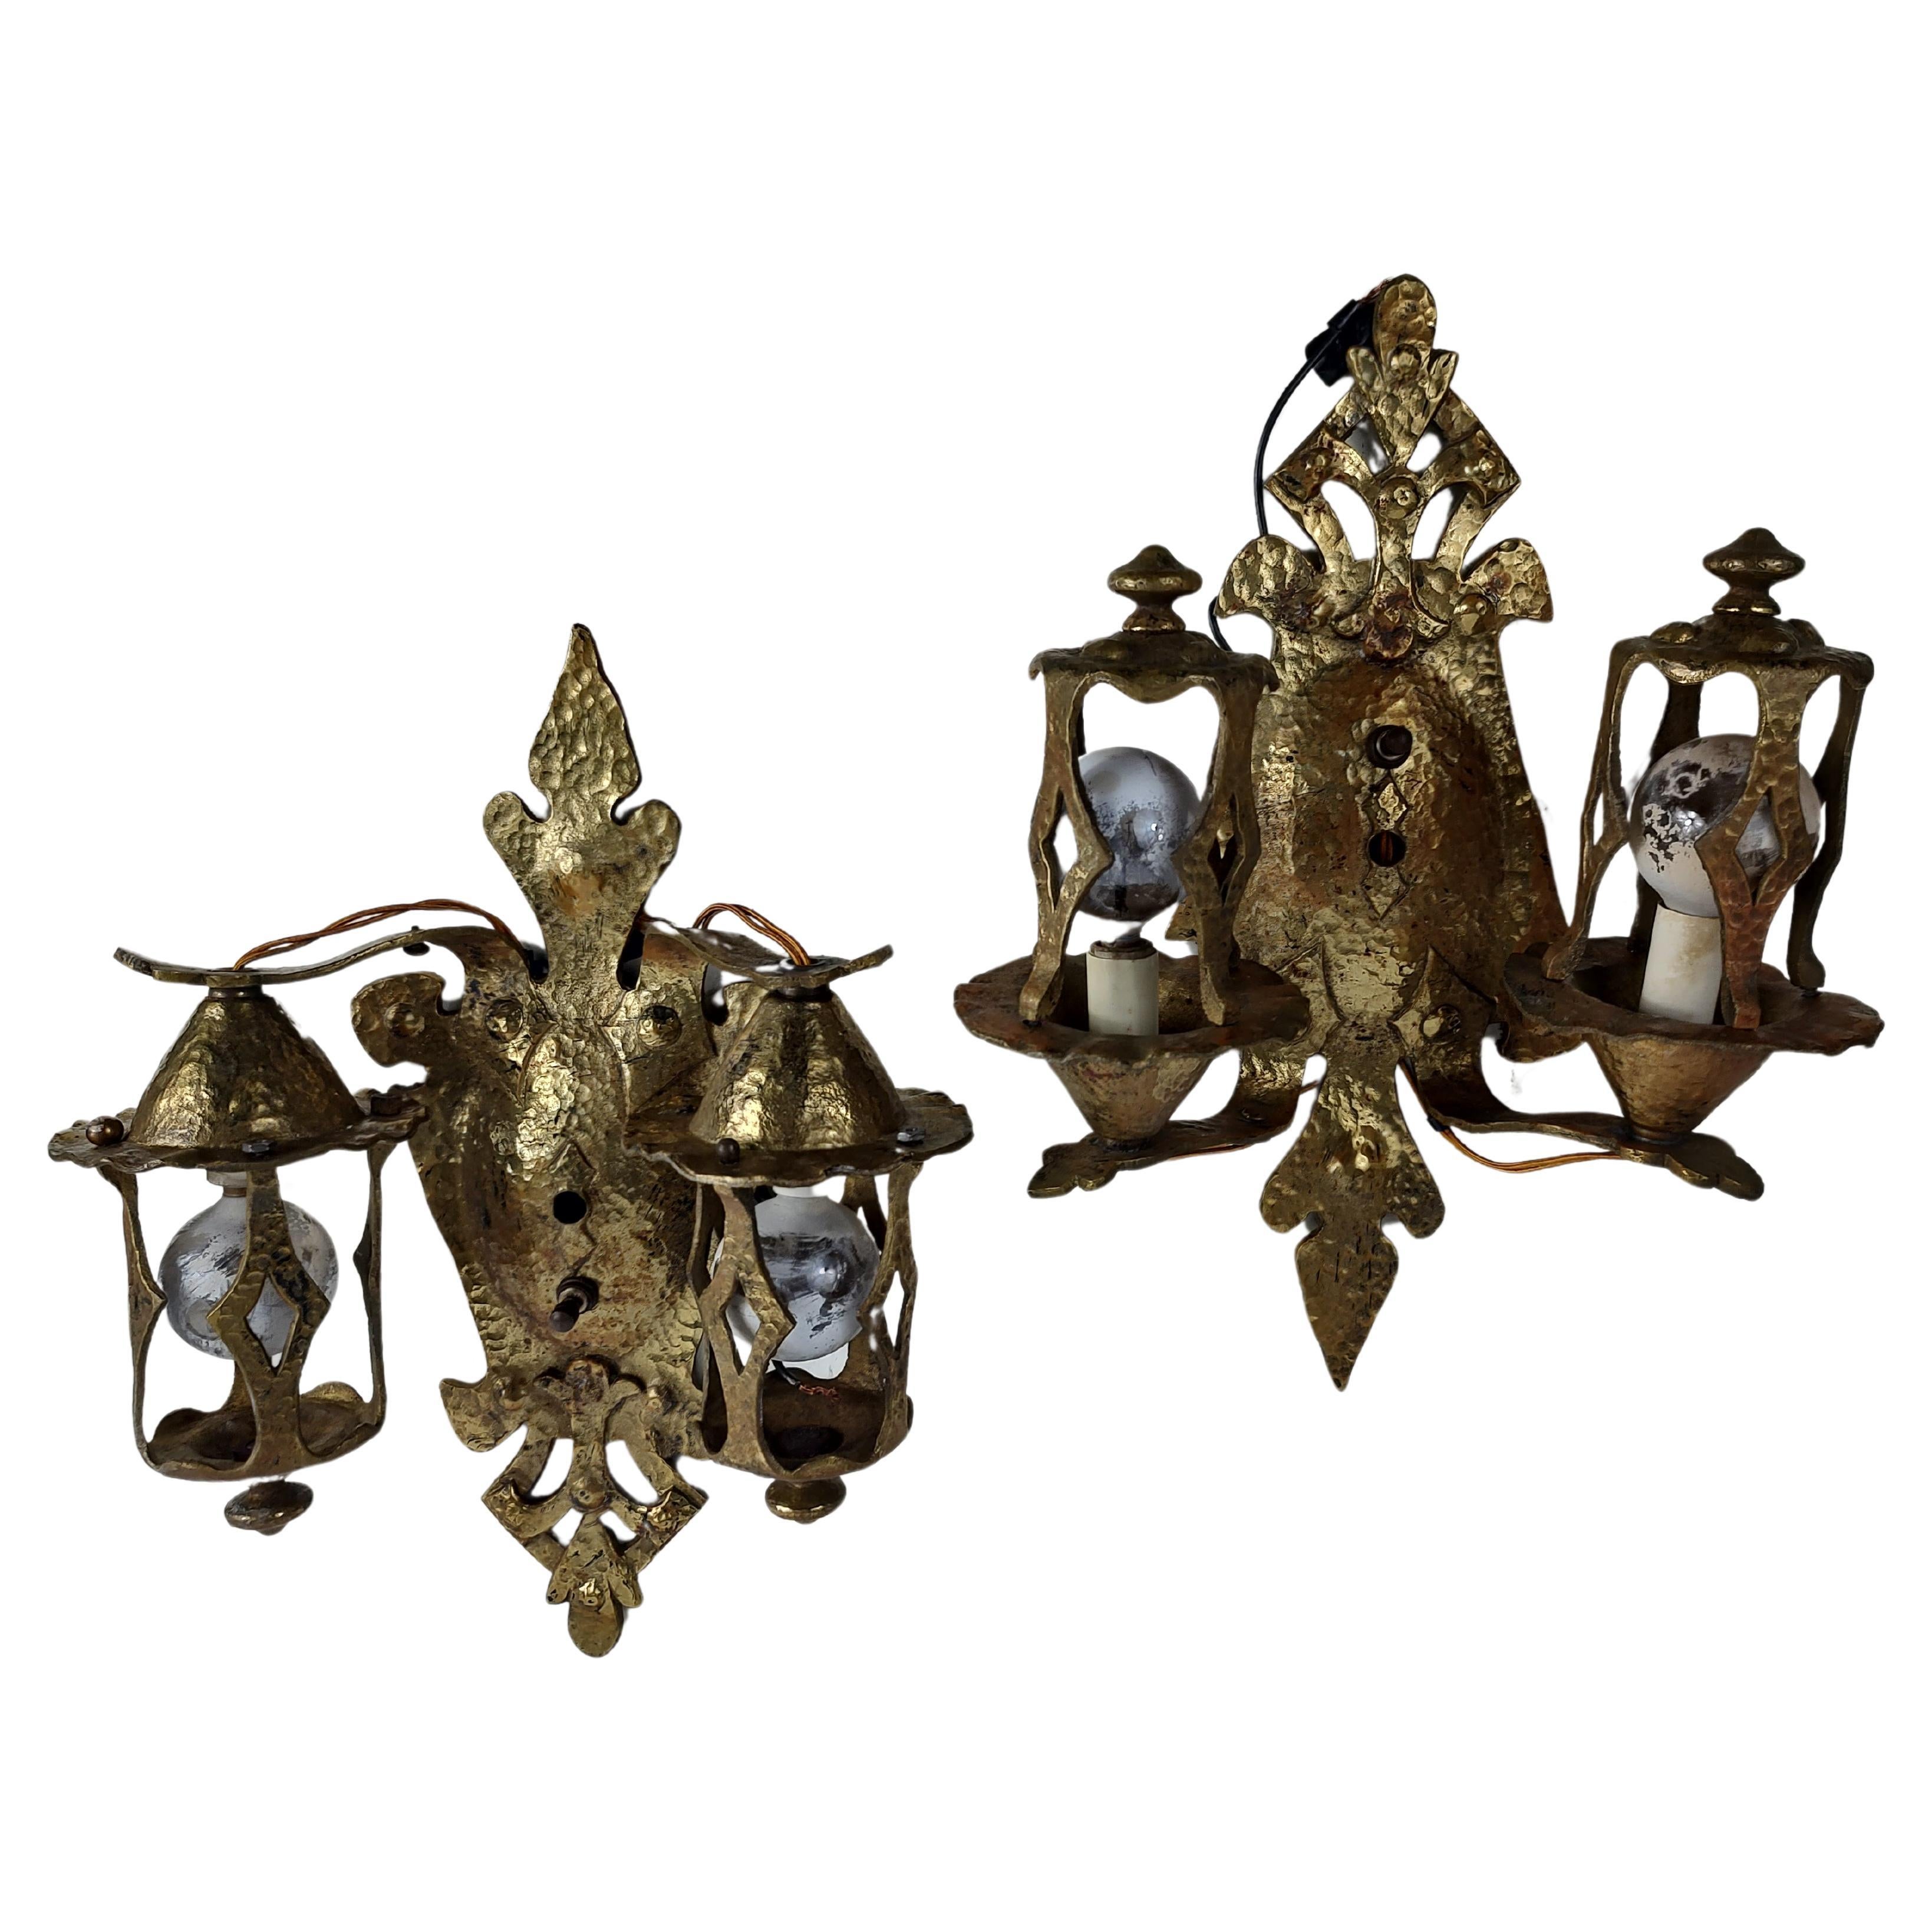 Fabulous pair of solid brass Arts & Crafts hand-hammered wall sconces with all new wiring and electrical components. Truly a great looking design with 2 bulbs on each sconce. Original locking nuts and hardware not pictured also included. In